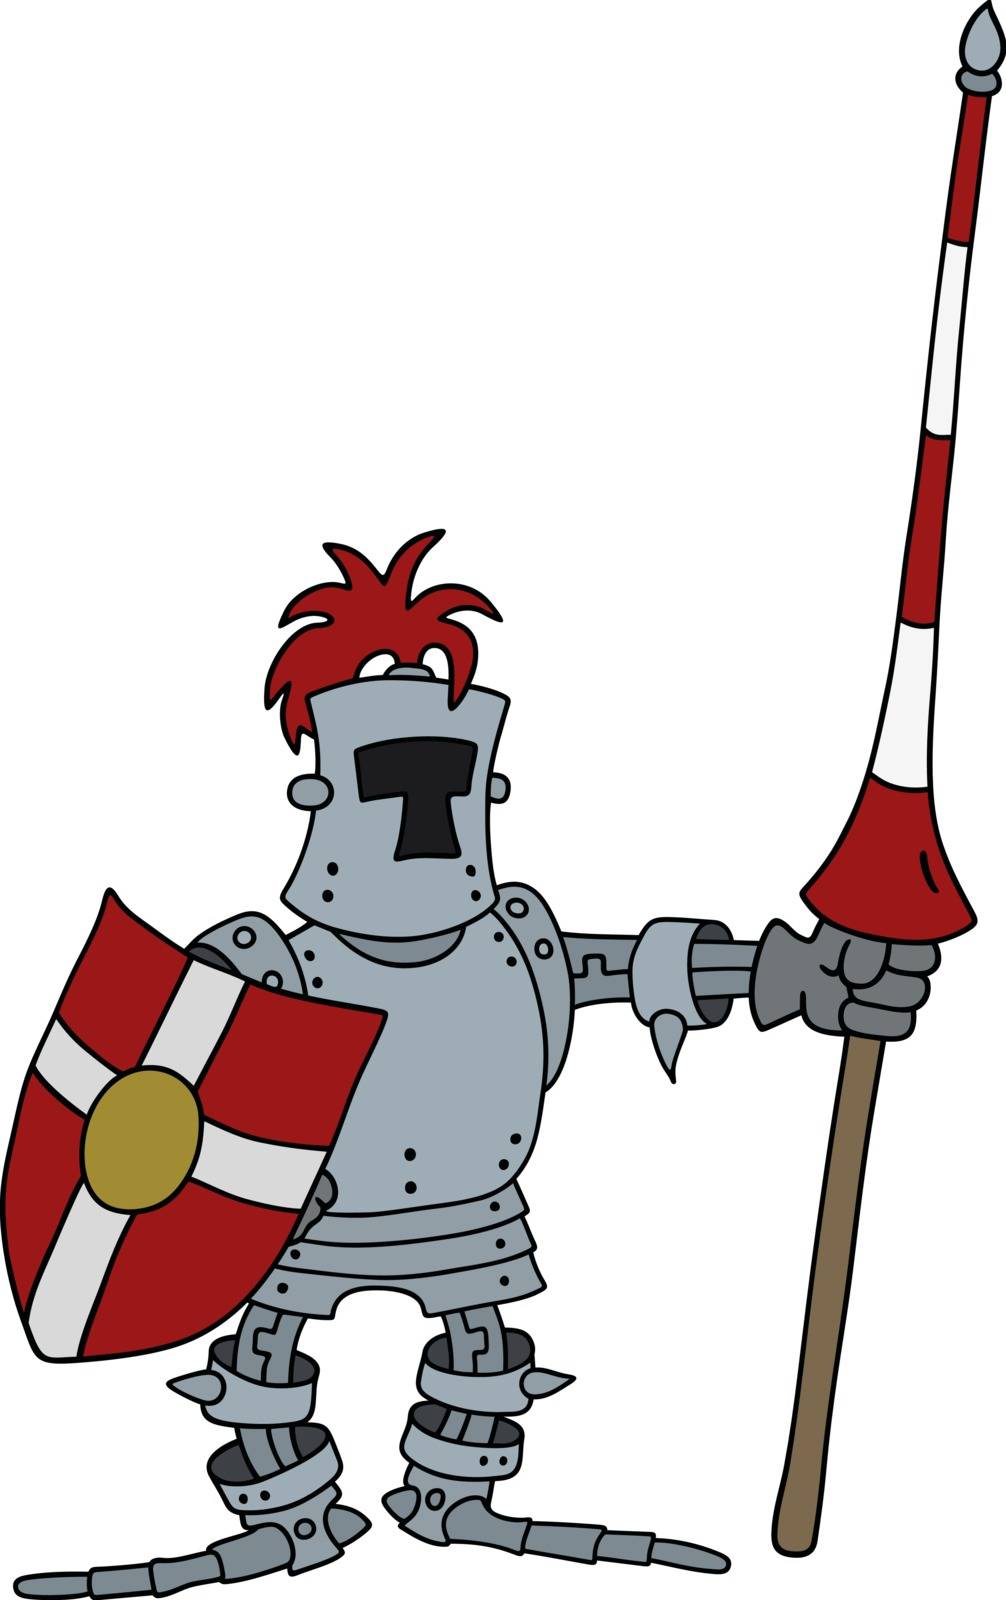 The vectorized hand drawing of a funny knight with a shield and lance